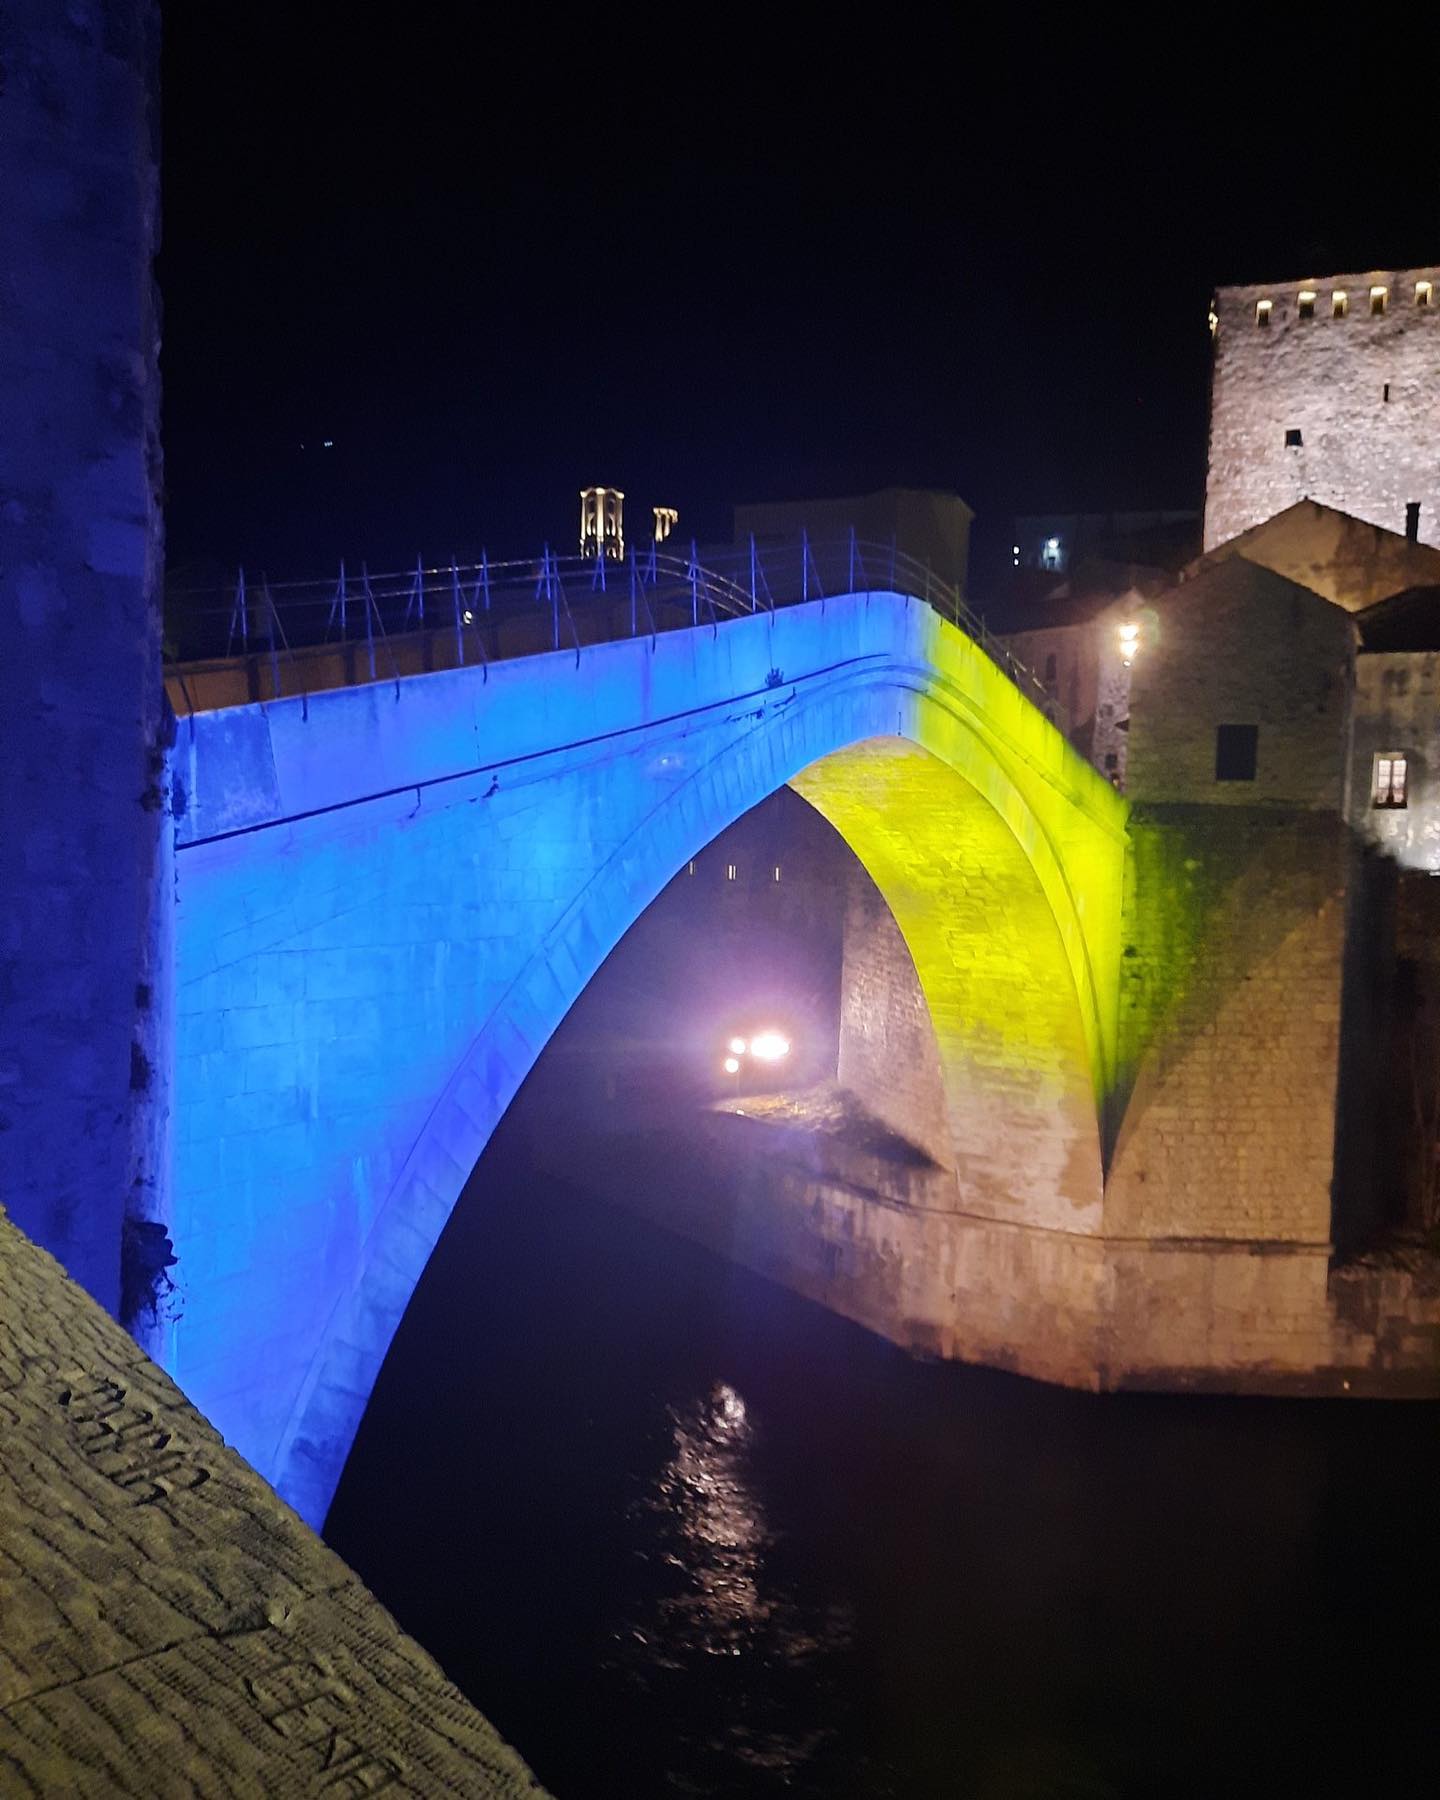 The Old Bridge in Mostar was lit up with the colors of the Ukrainian flag as a sign of solidarity. 🇺🇦